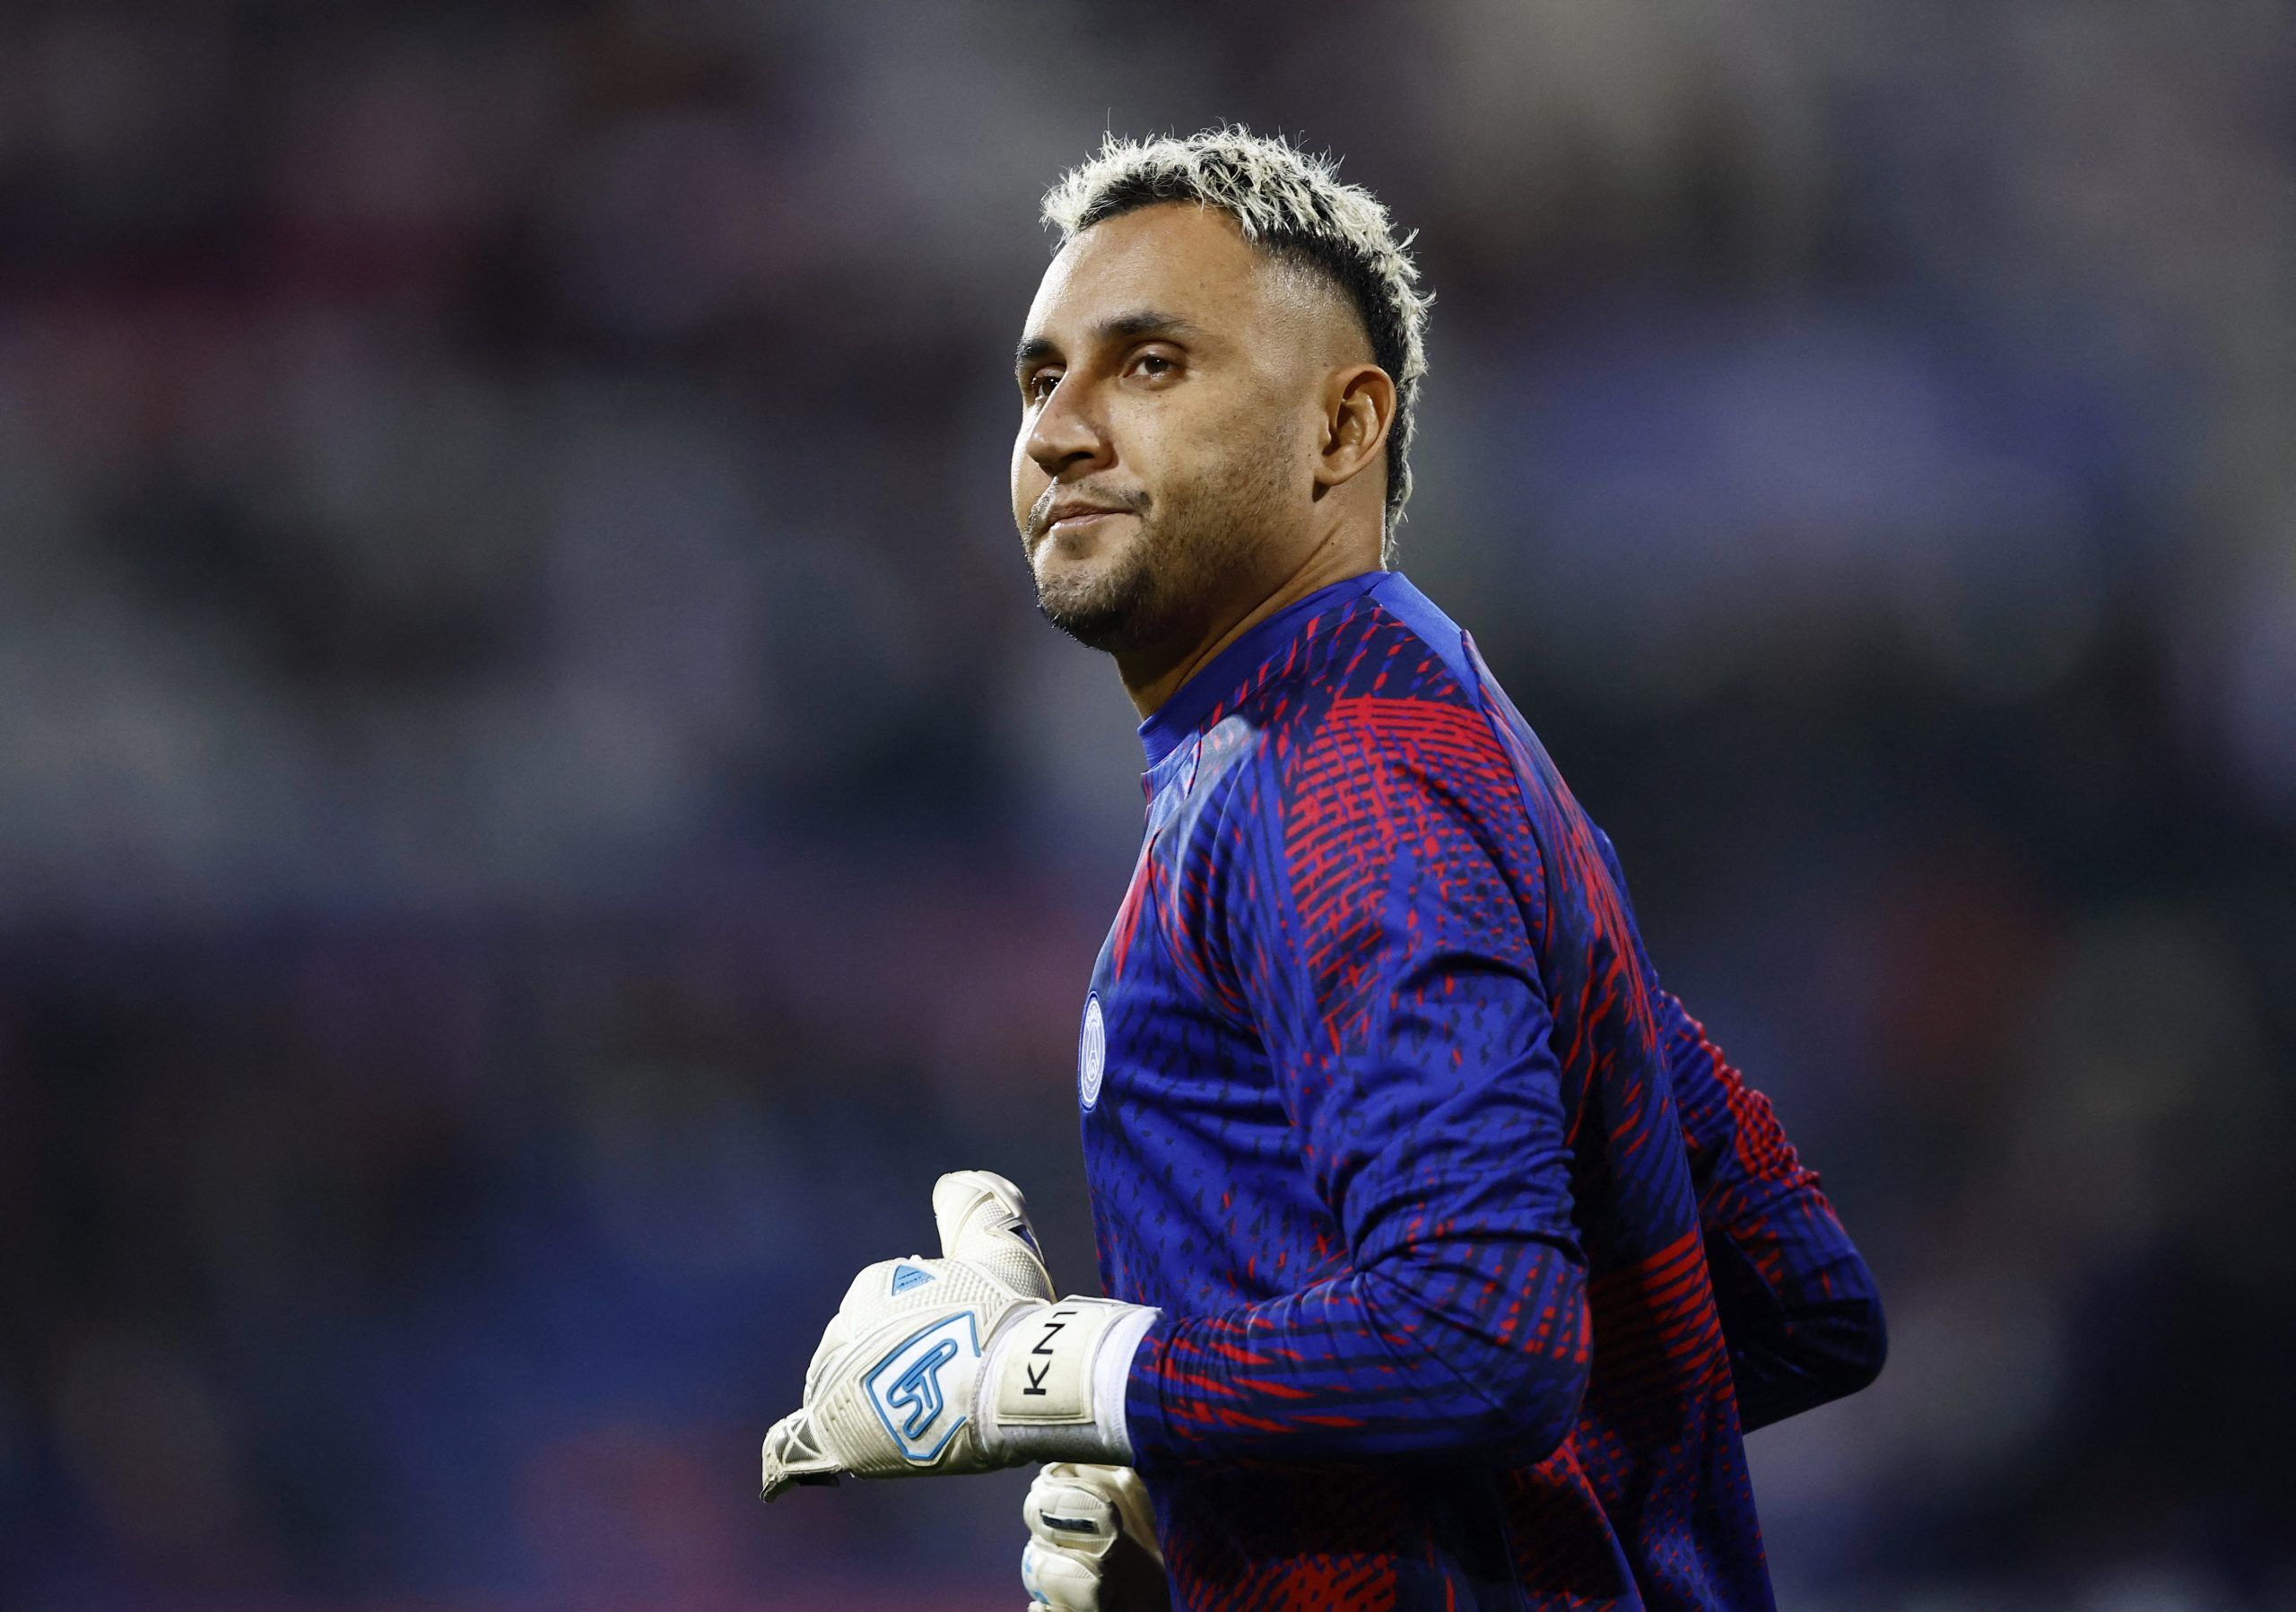 Soccer Football - Coupe de France - LB Chateauroux v Paris St Germain - Stade Gaston Petit, Chateauroux, France - January 6, 2023 Paris St Germain's Keylor Navas during the warm up before the match REUTERS/Stephane Mahe